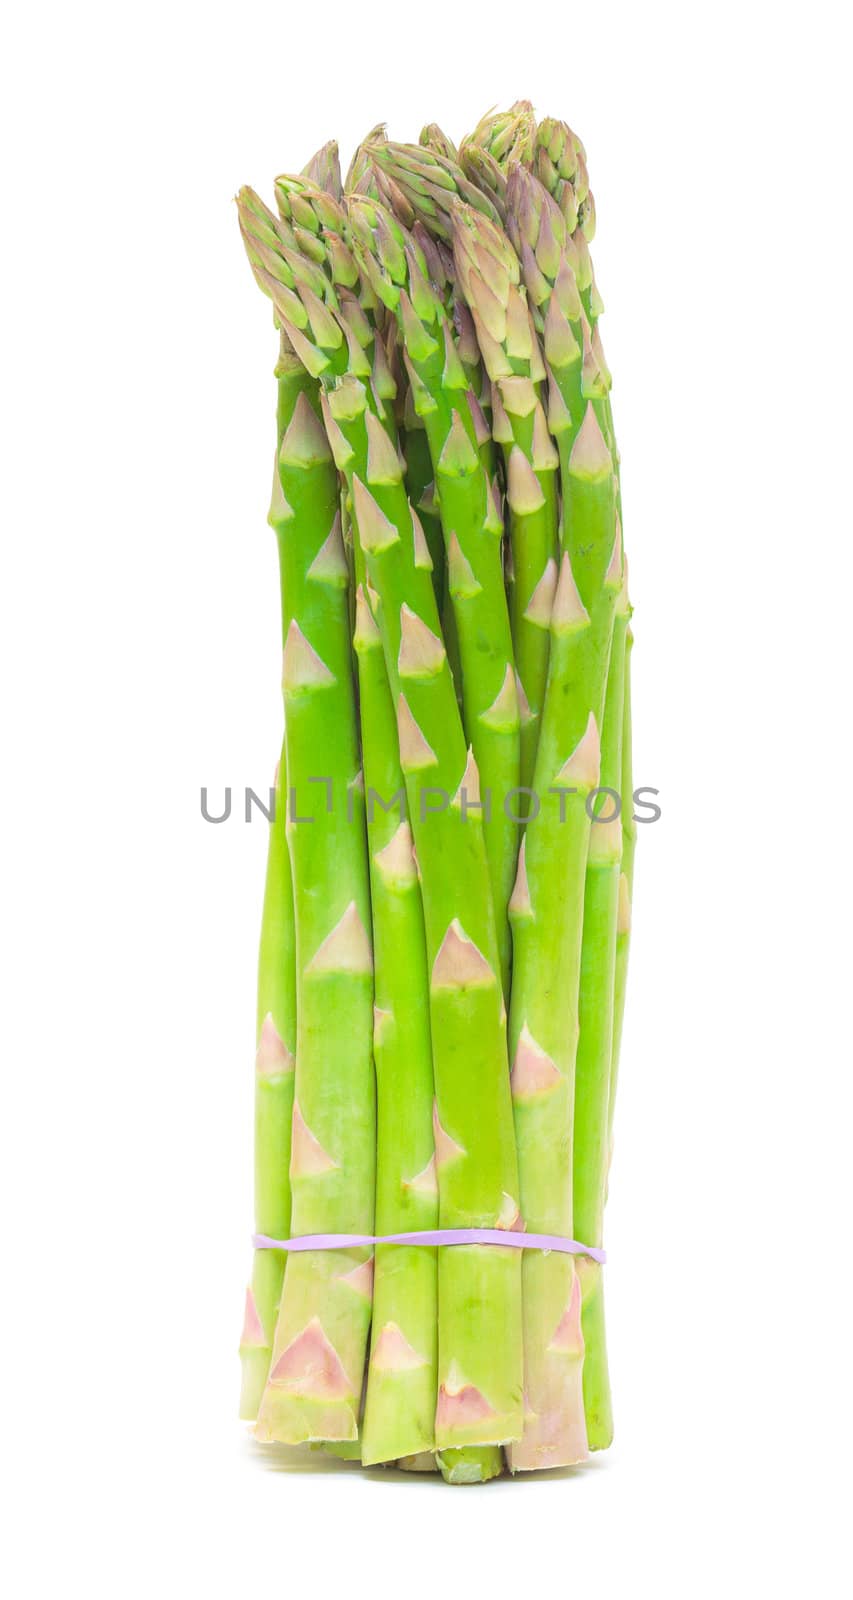 Fresh Green Asparagus Bunch by Discovod